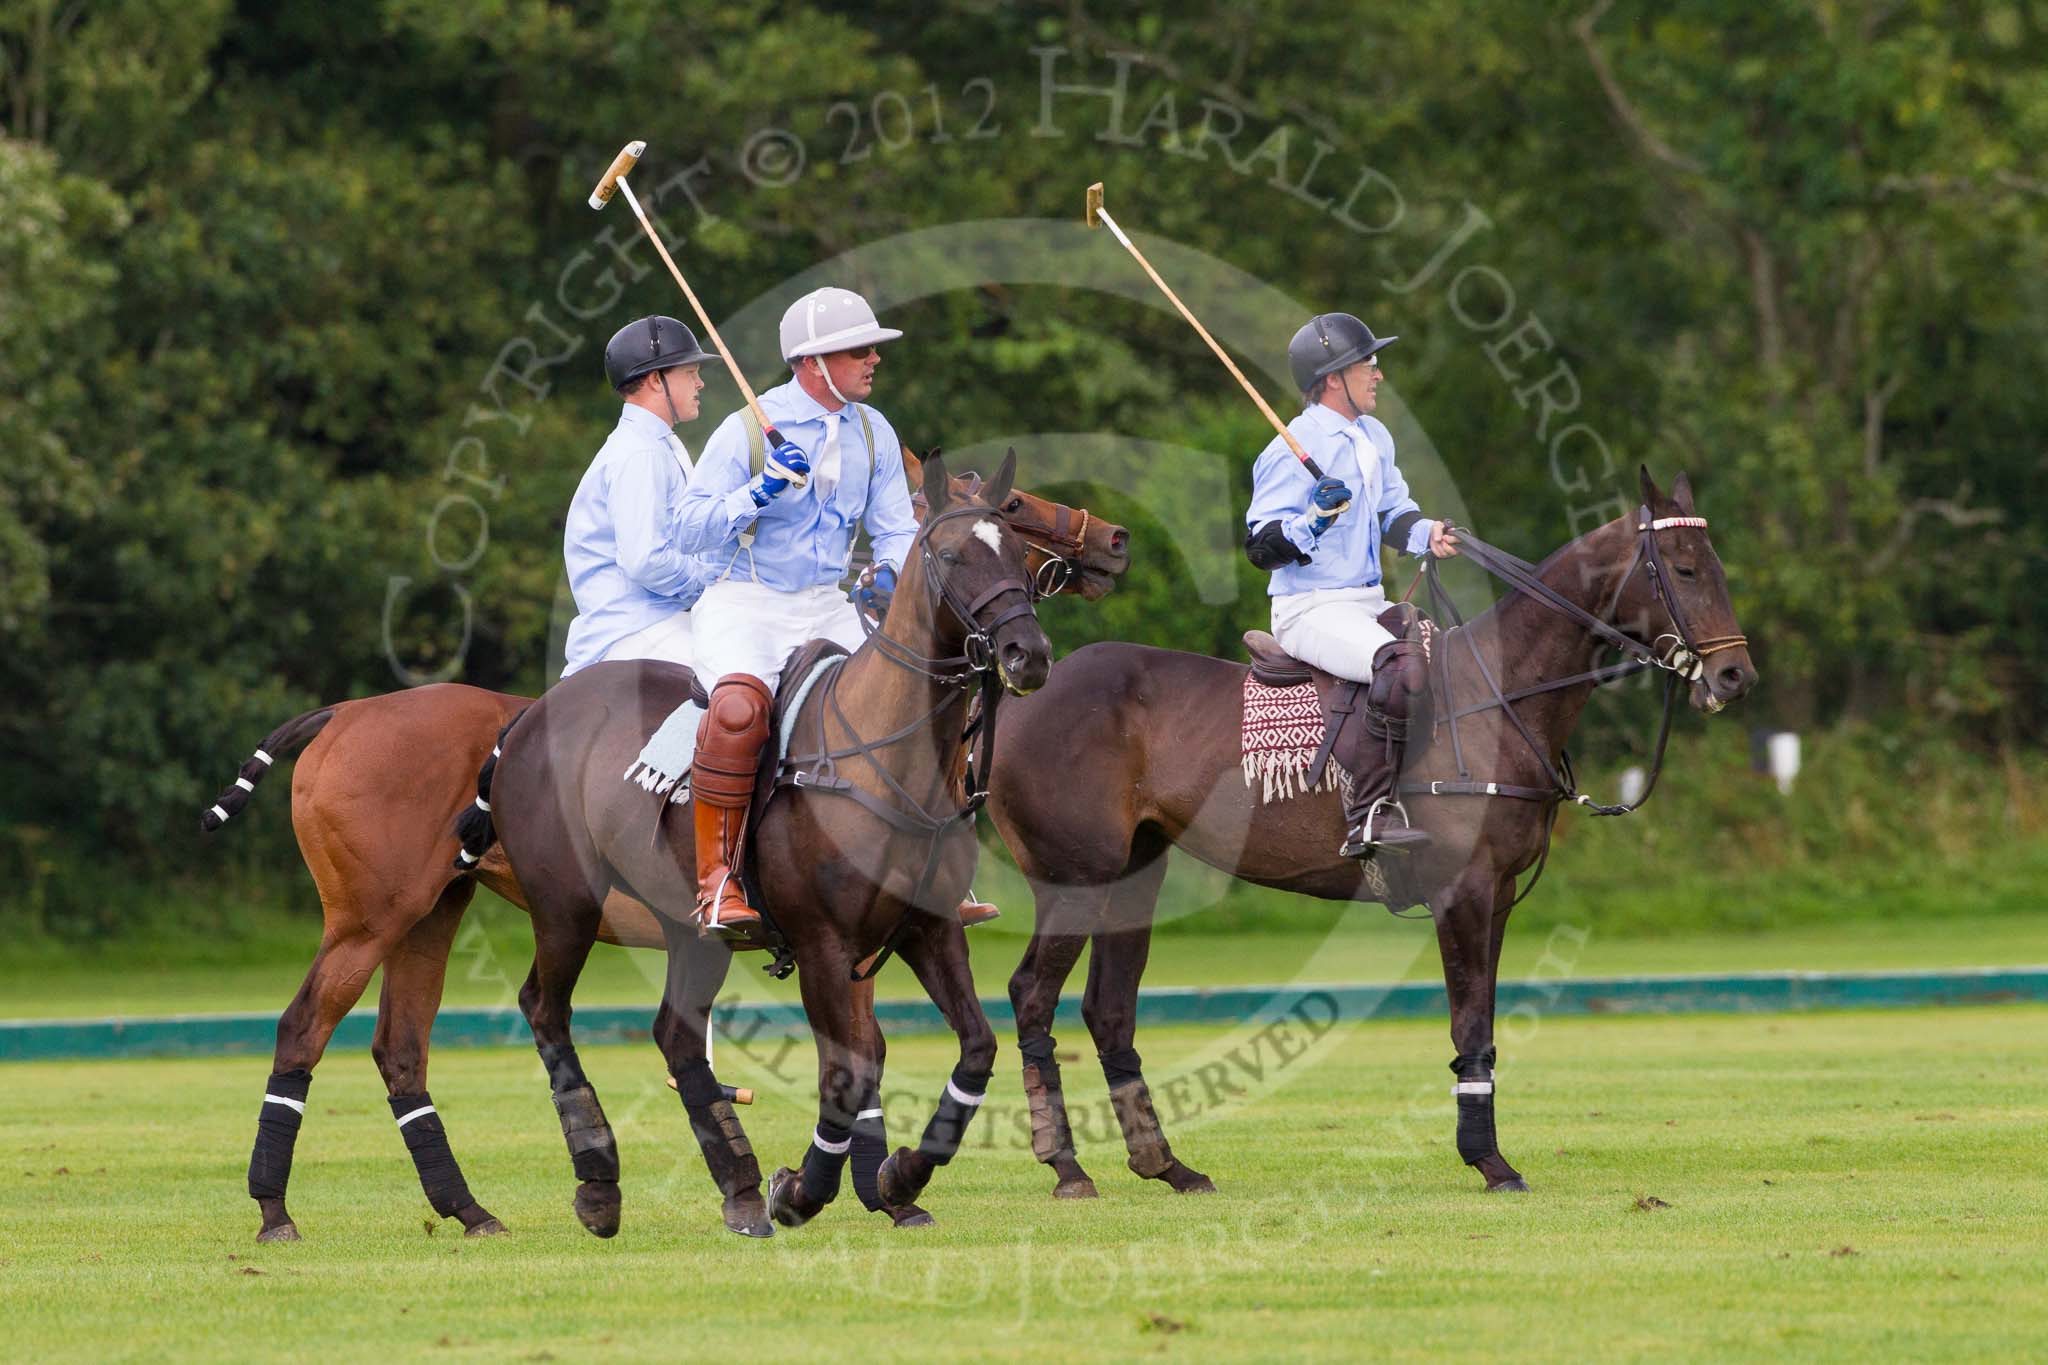 7th Heritage Polo Cup semi-finals: La Mariposa Argentina - Timothy Rose..
Hurtwood Park Polo Club,
Ewhurst Green,
Surrey,
United Kingdom,
on 04 August 2012 at 15:44, image #268